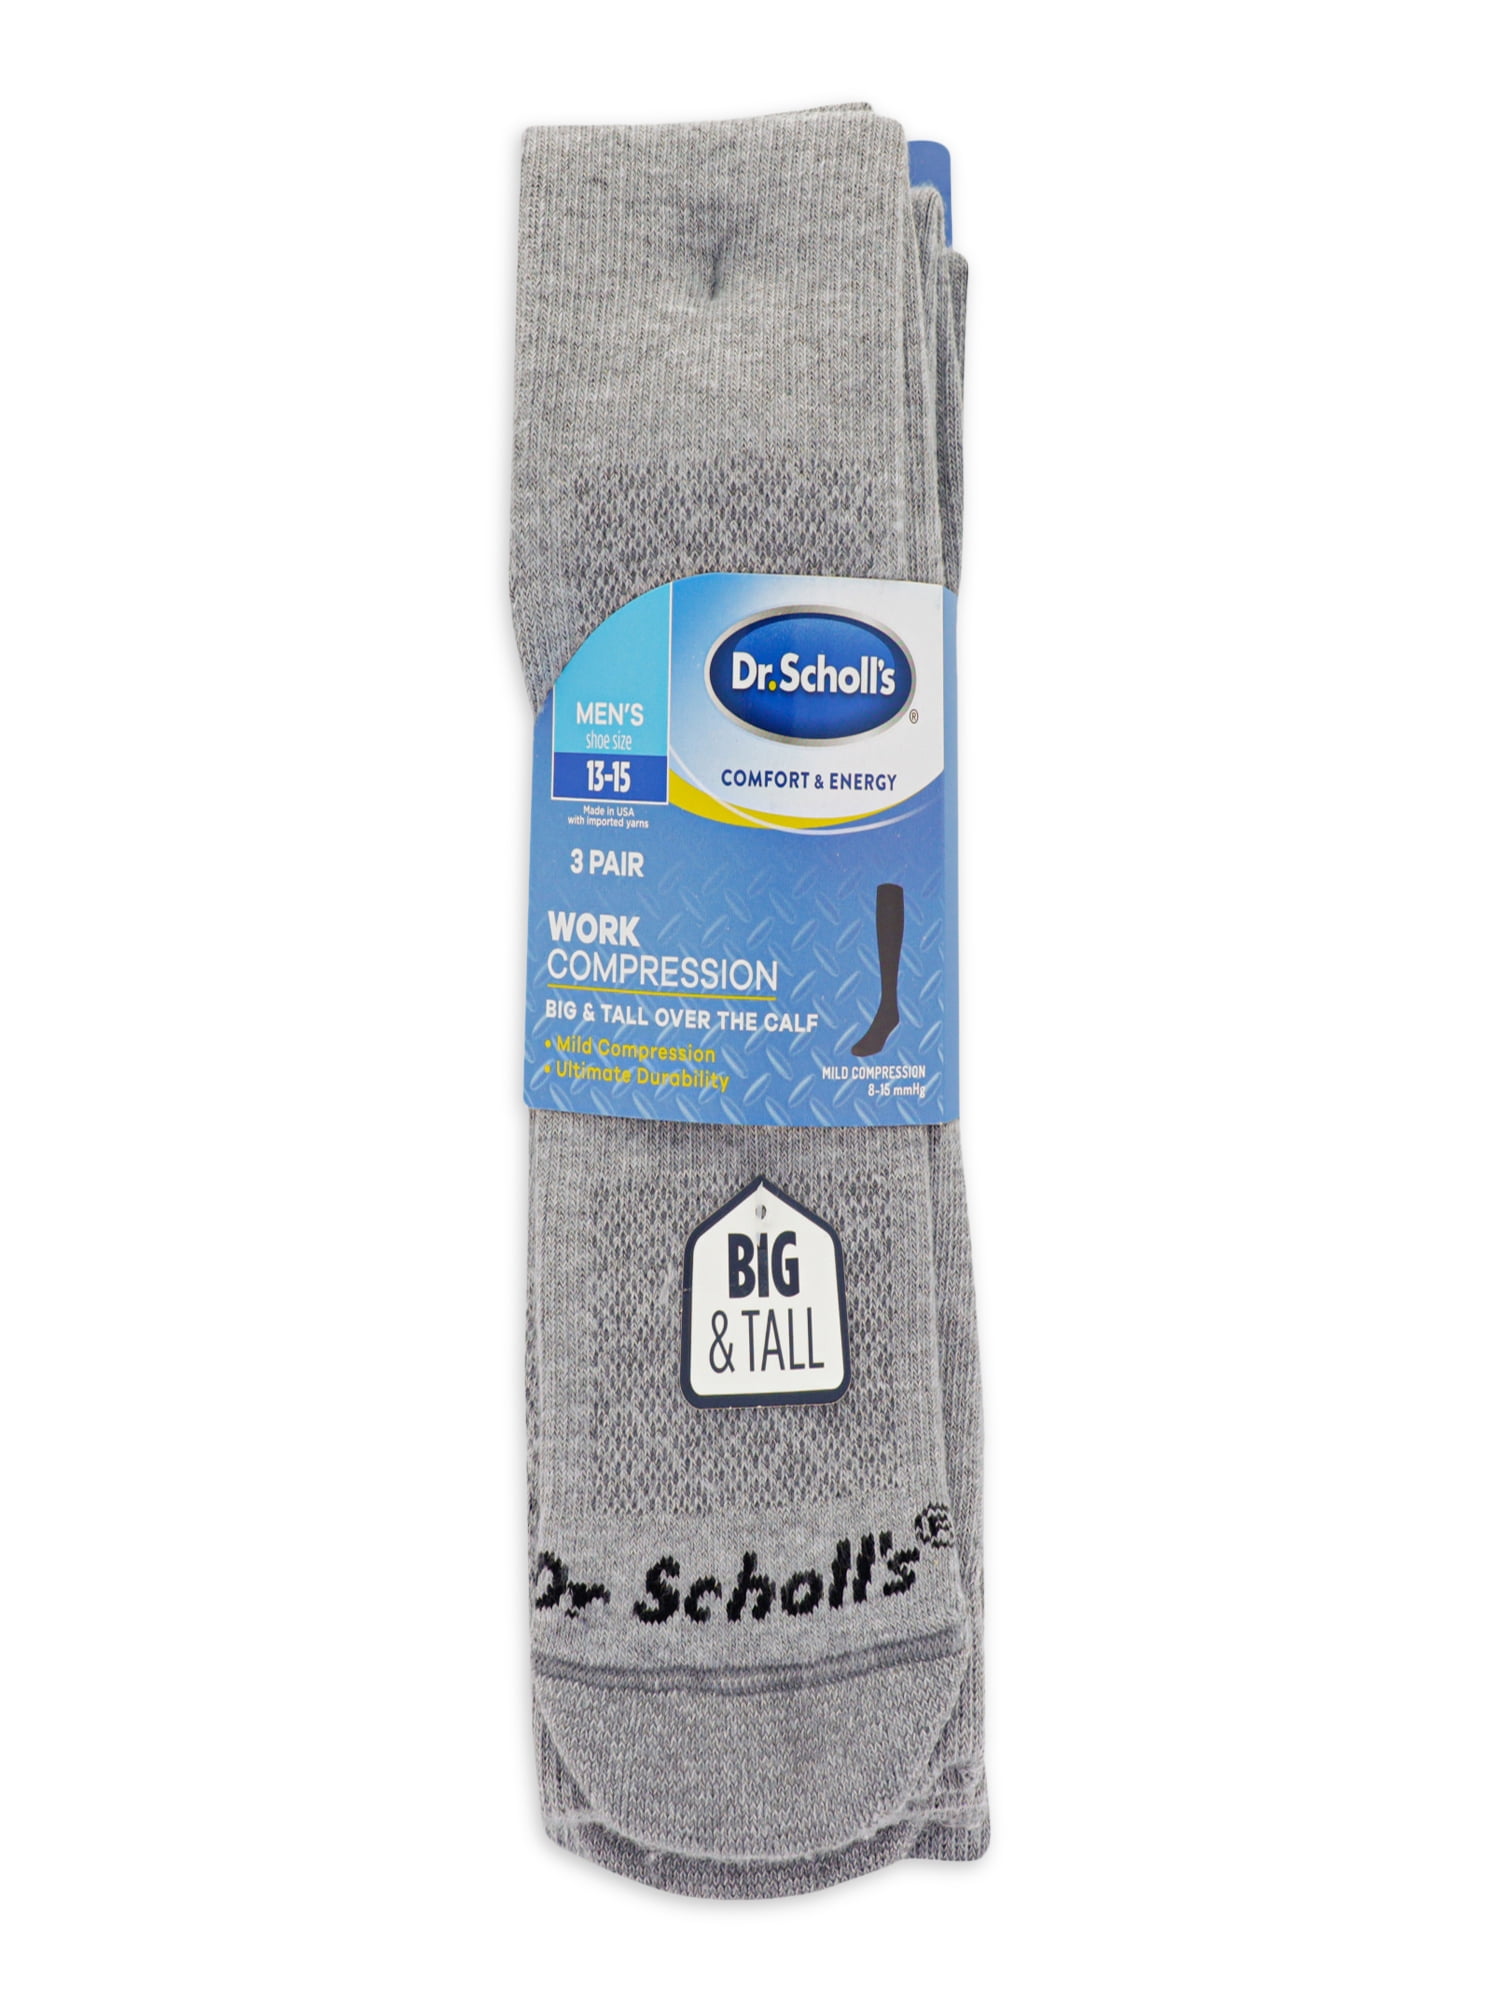 Scholl's Men's Athletic & Work Compression Over the Calf Socks Dr 